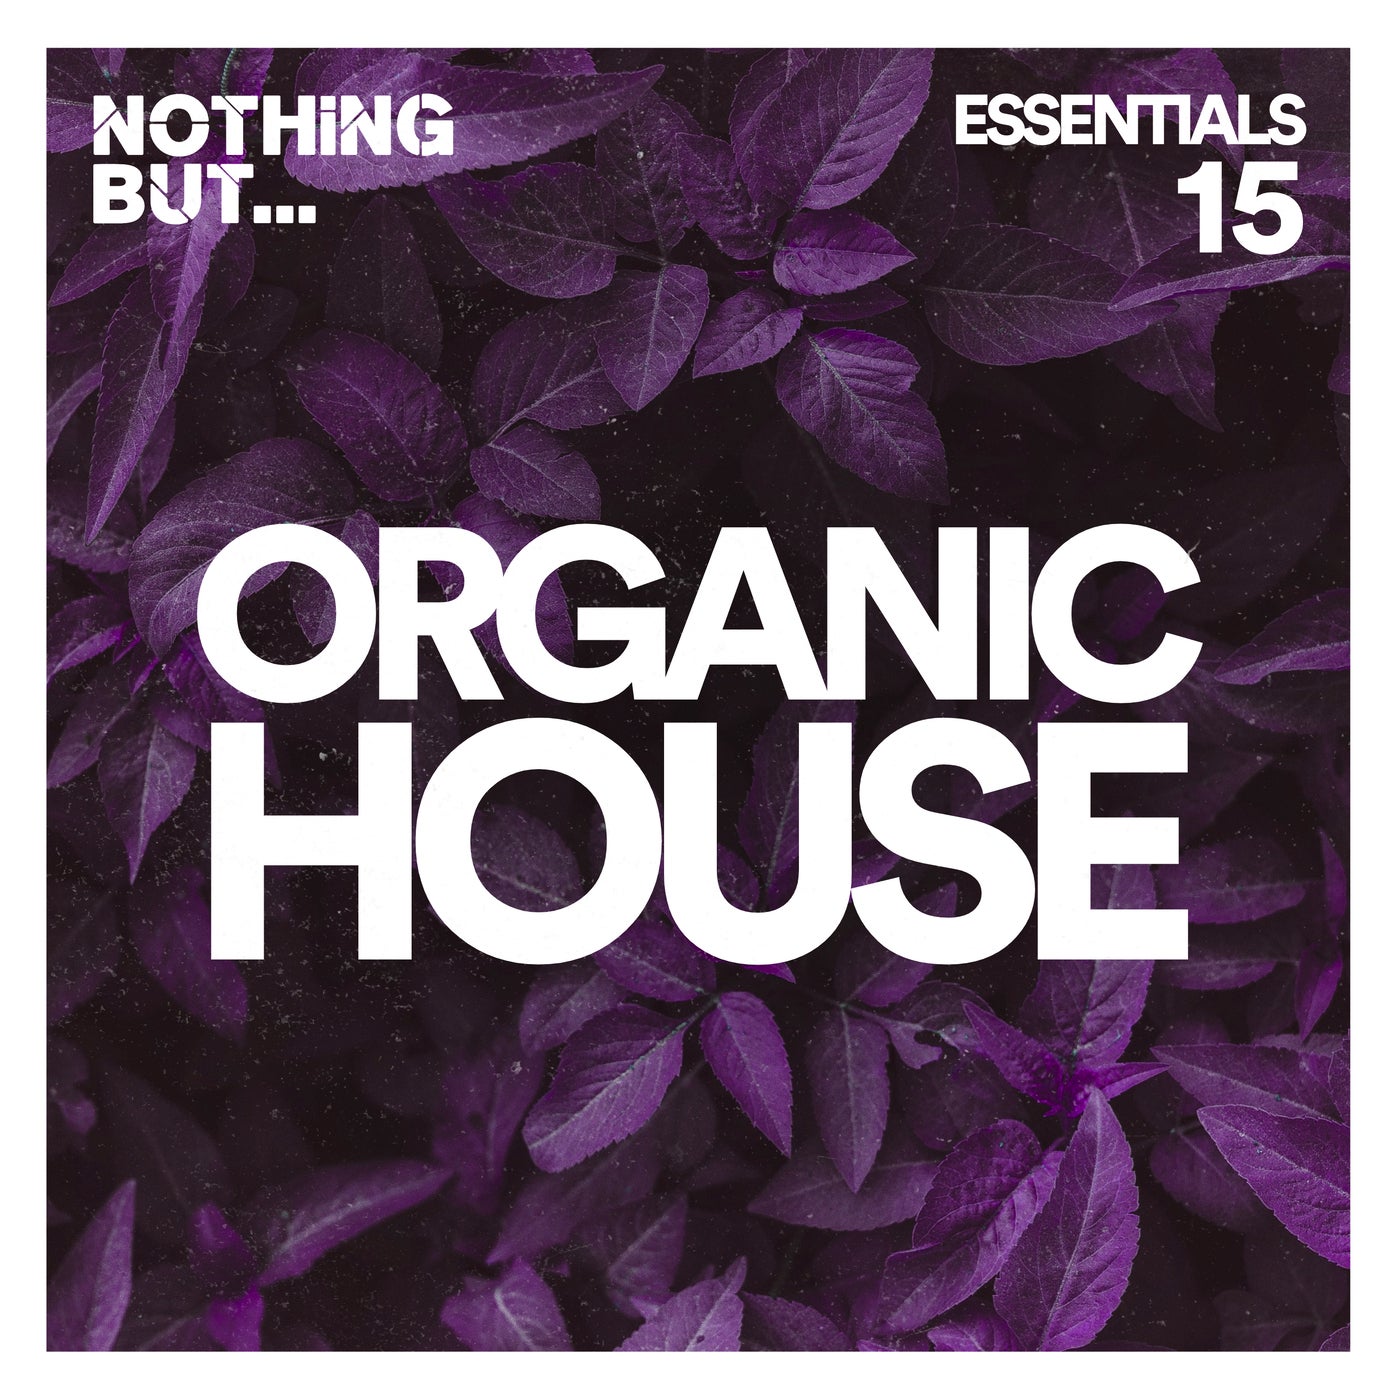 Nothing But... Organic House Essentials, Vol. 15